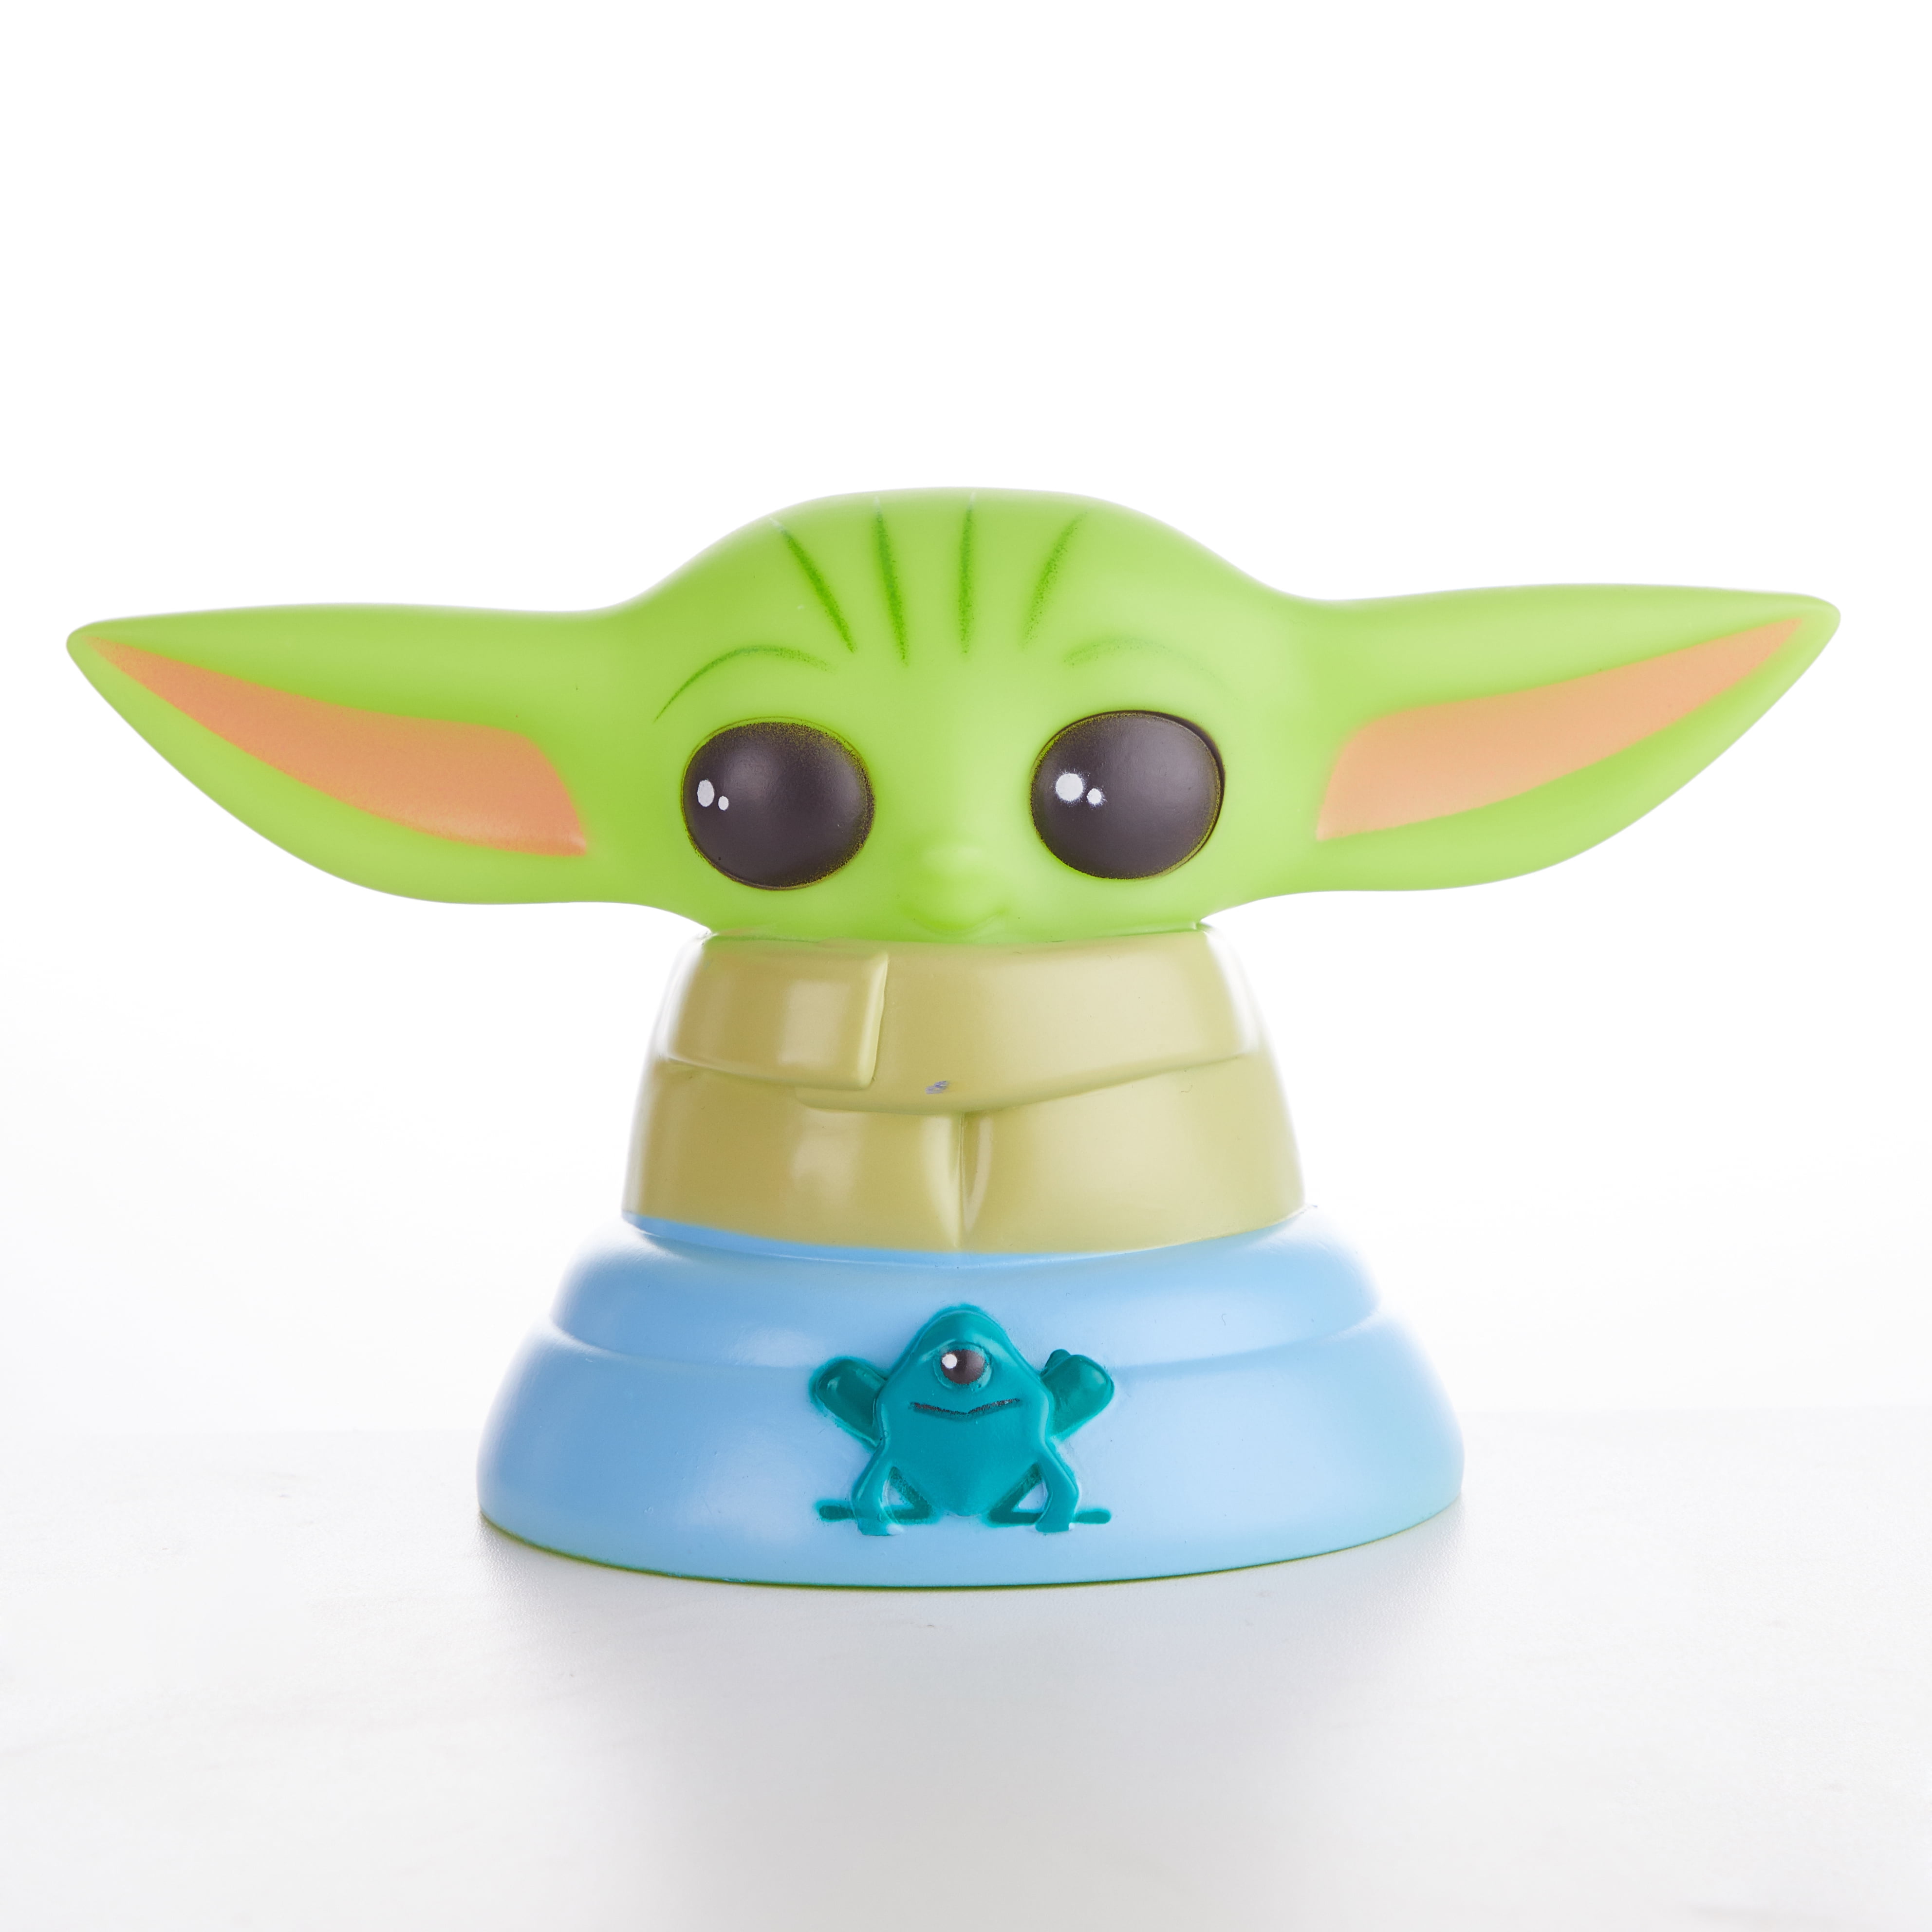 Lucas Star Wars Star Wars Baby Yoda 3D LED Color Changing Mood Light with 30 Minute Timer, Green, 6"H x 4"W